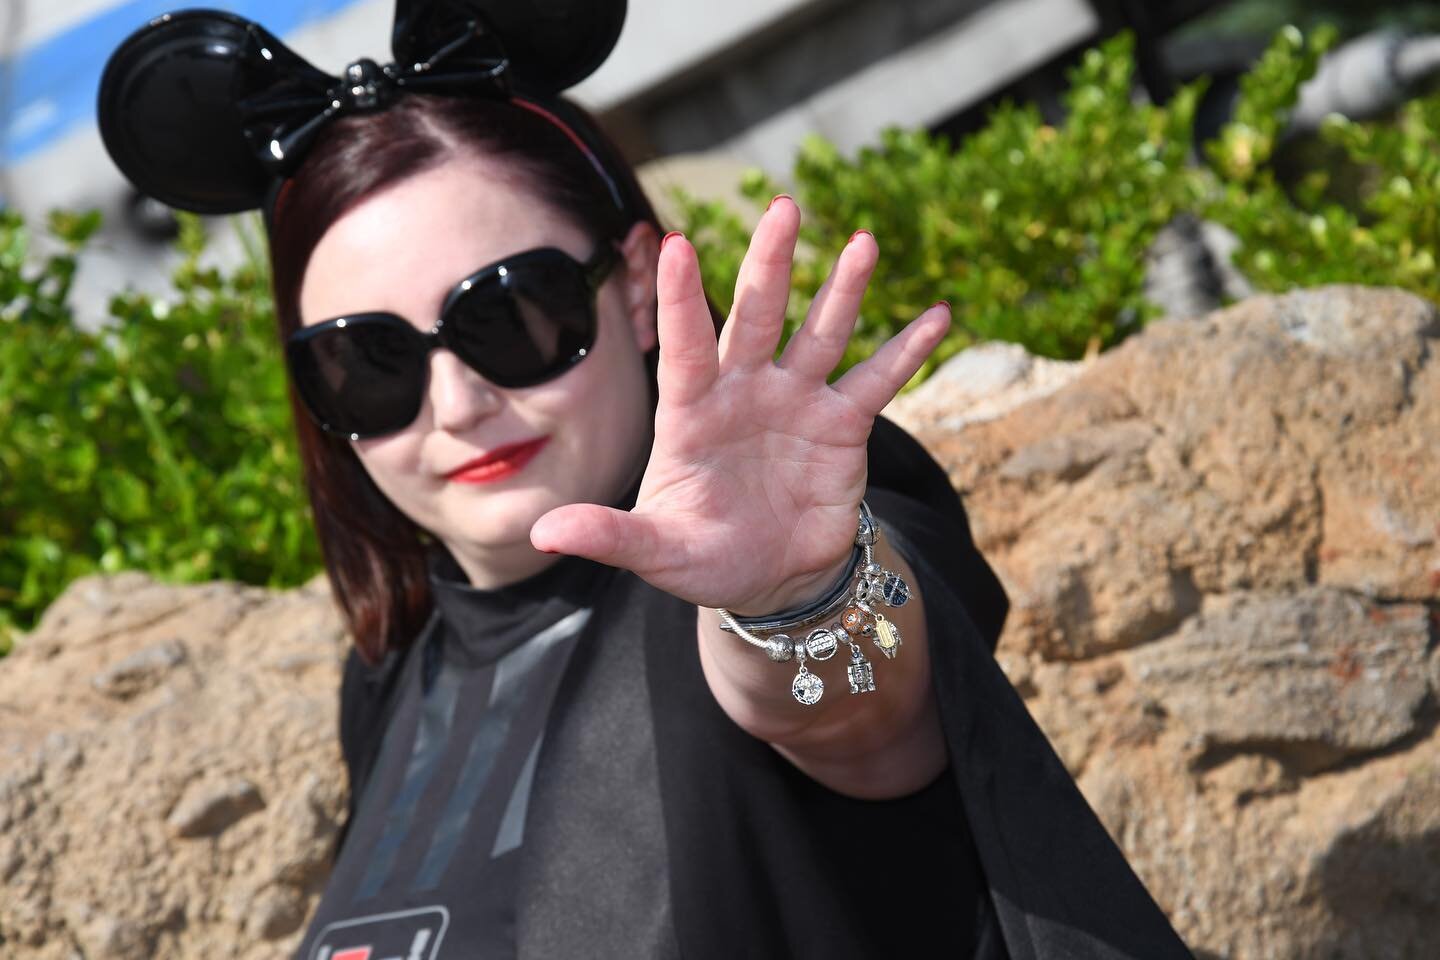 It&rsquo;s no secret that I enjoy dressing up, and while I haven&rsquo;t done much in the way of cosplay in a while, I couldn&rsquo;t say no to some fun at Disney. My sister marched with her high school band in May and I made the trip with family and